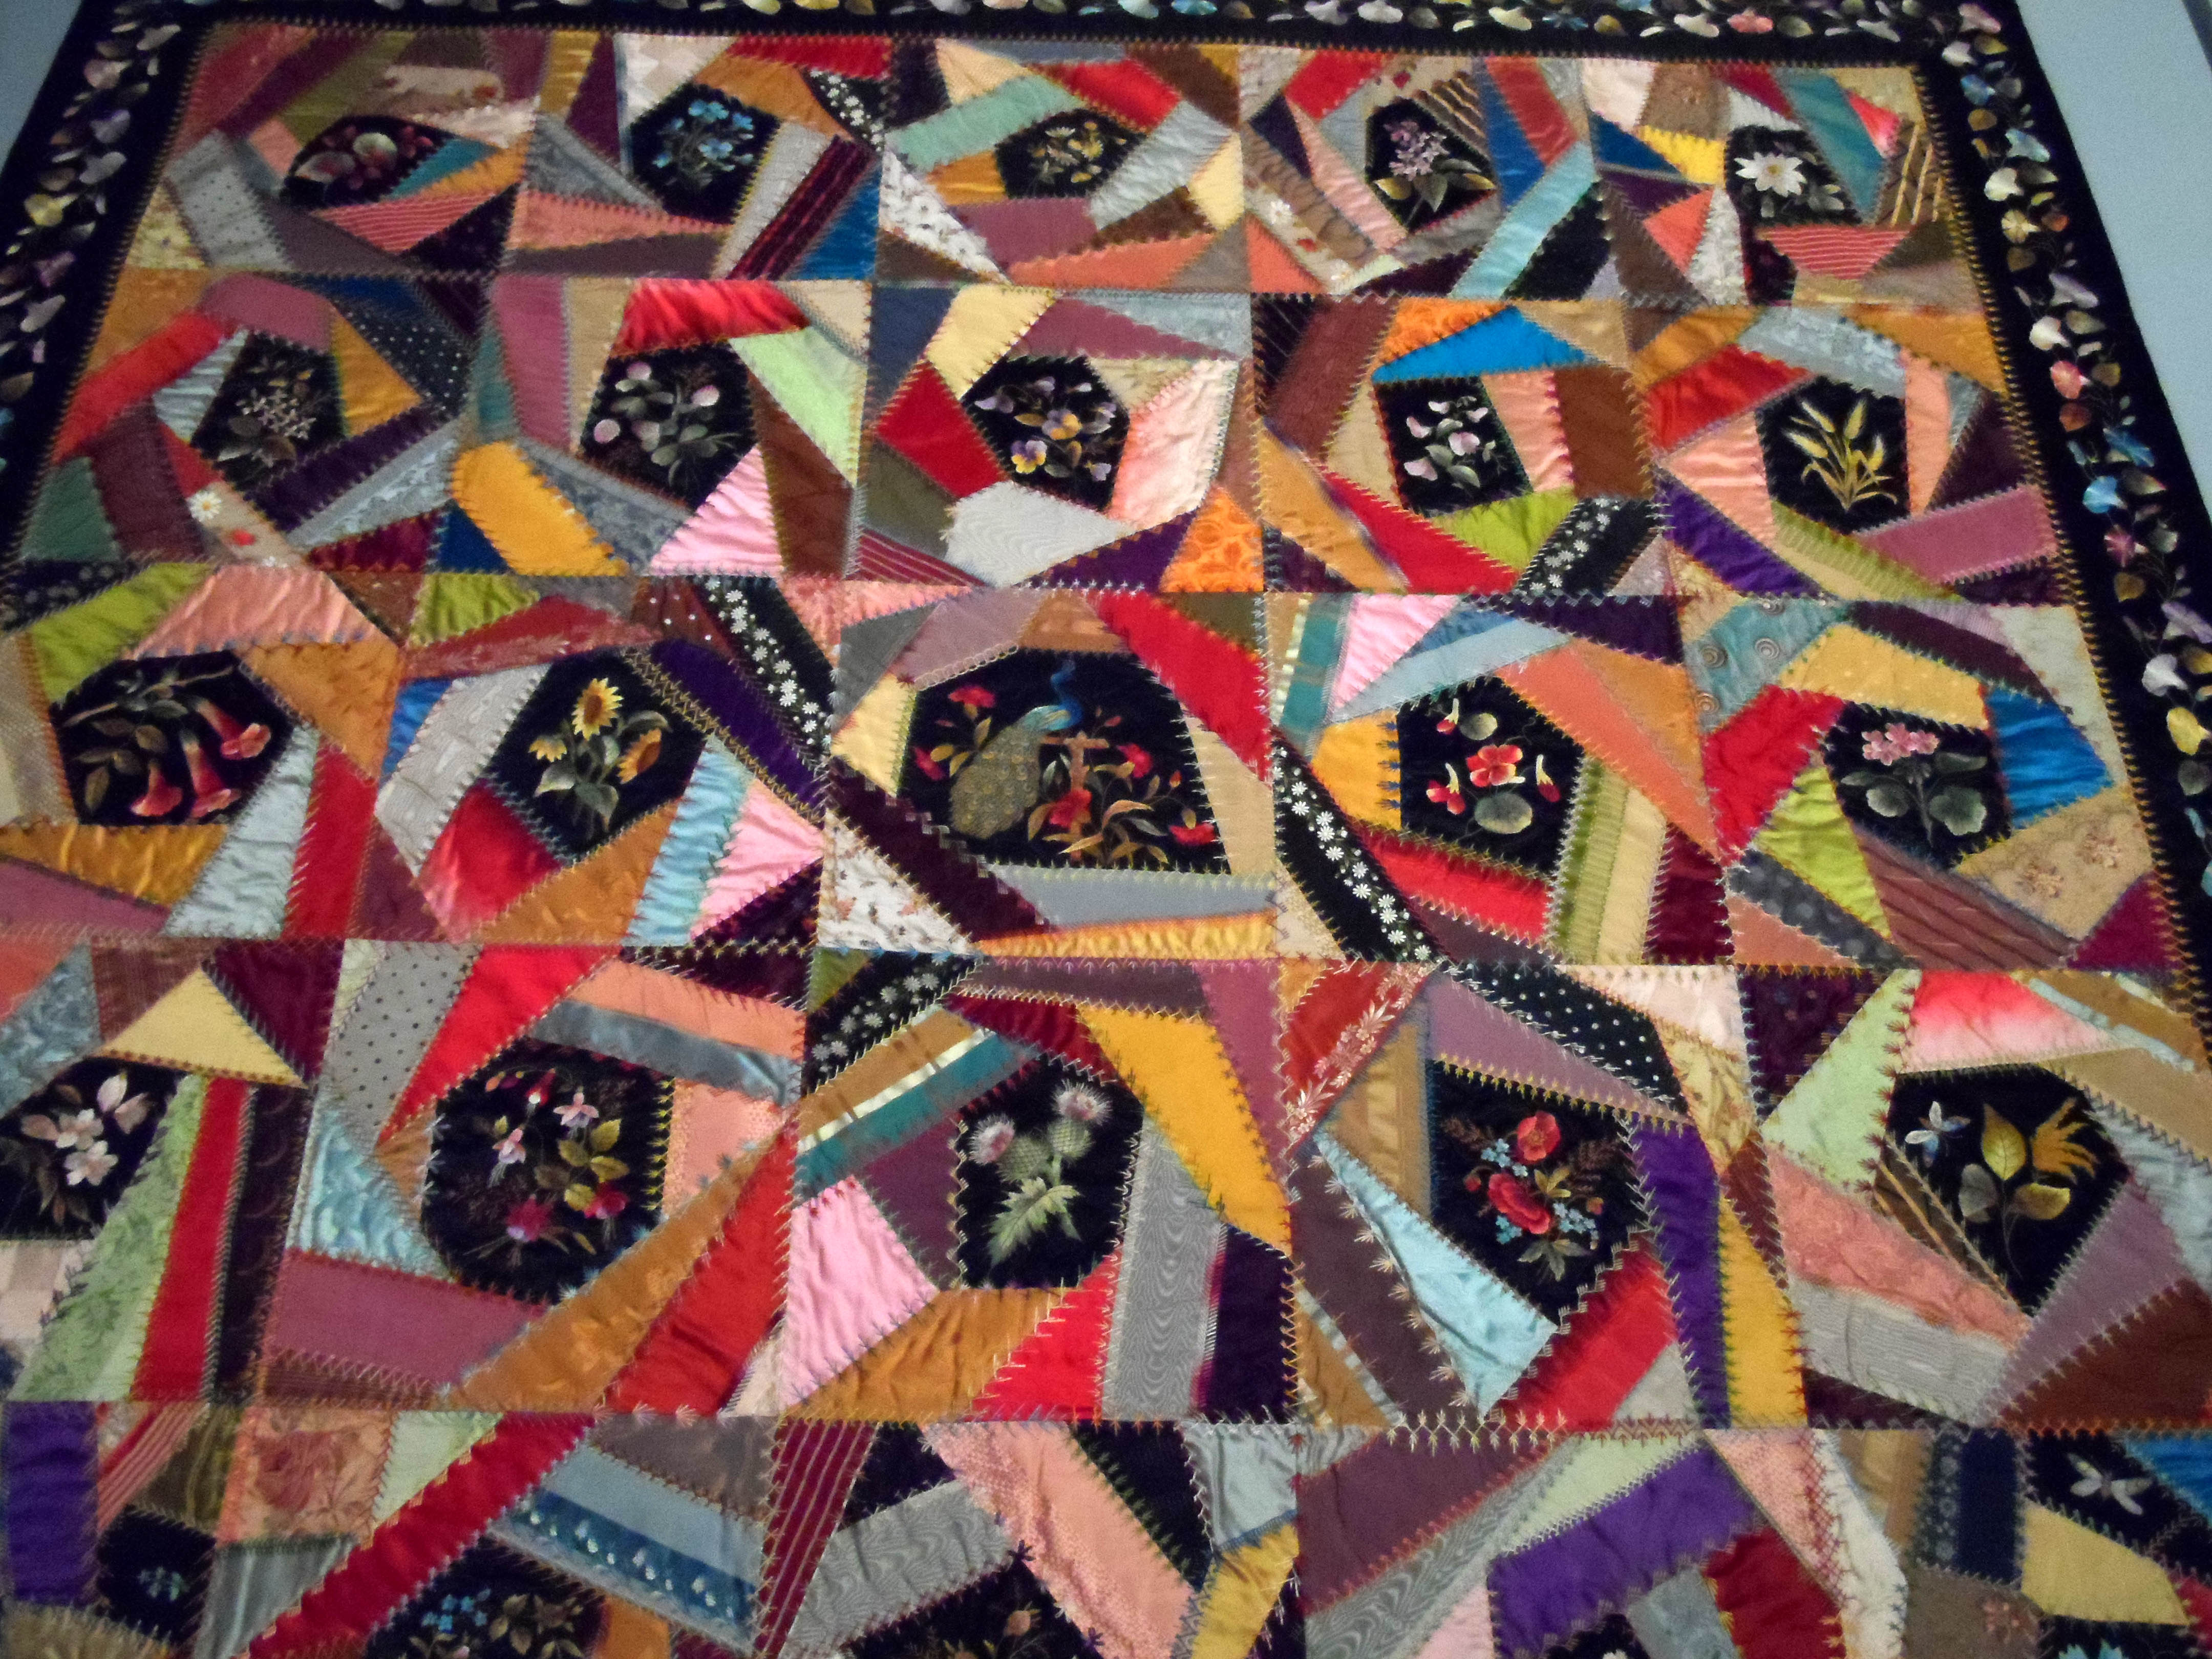 detail of CRAZY QUILT, circa 1880, silk. There is an embroidered flower in the centre of each block. It was made by Mary Stinson, who was a professional dressmaker